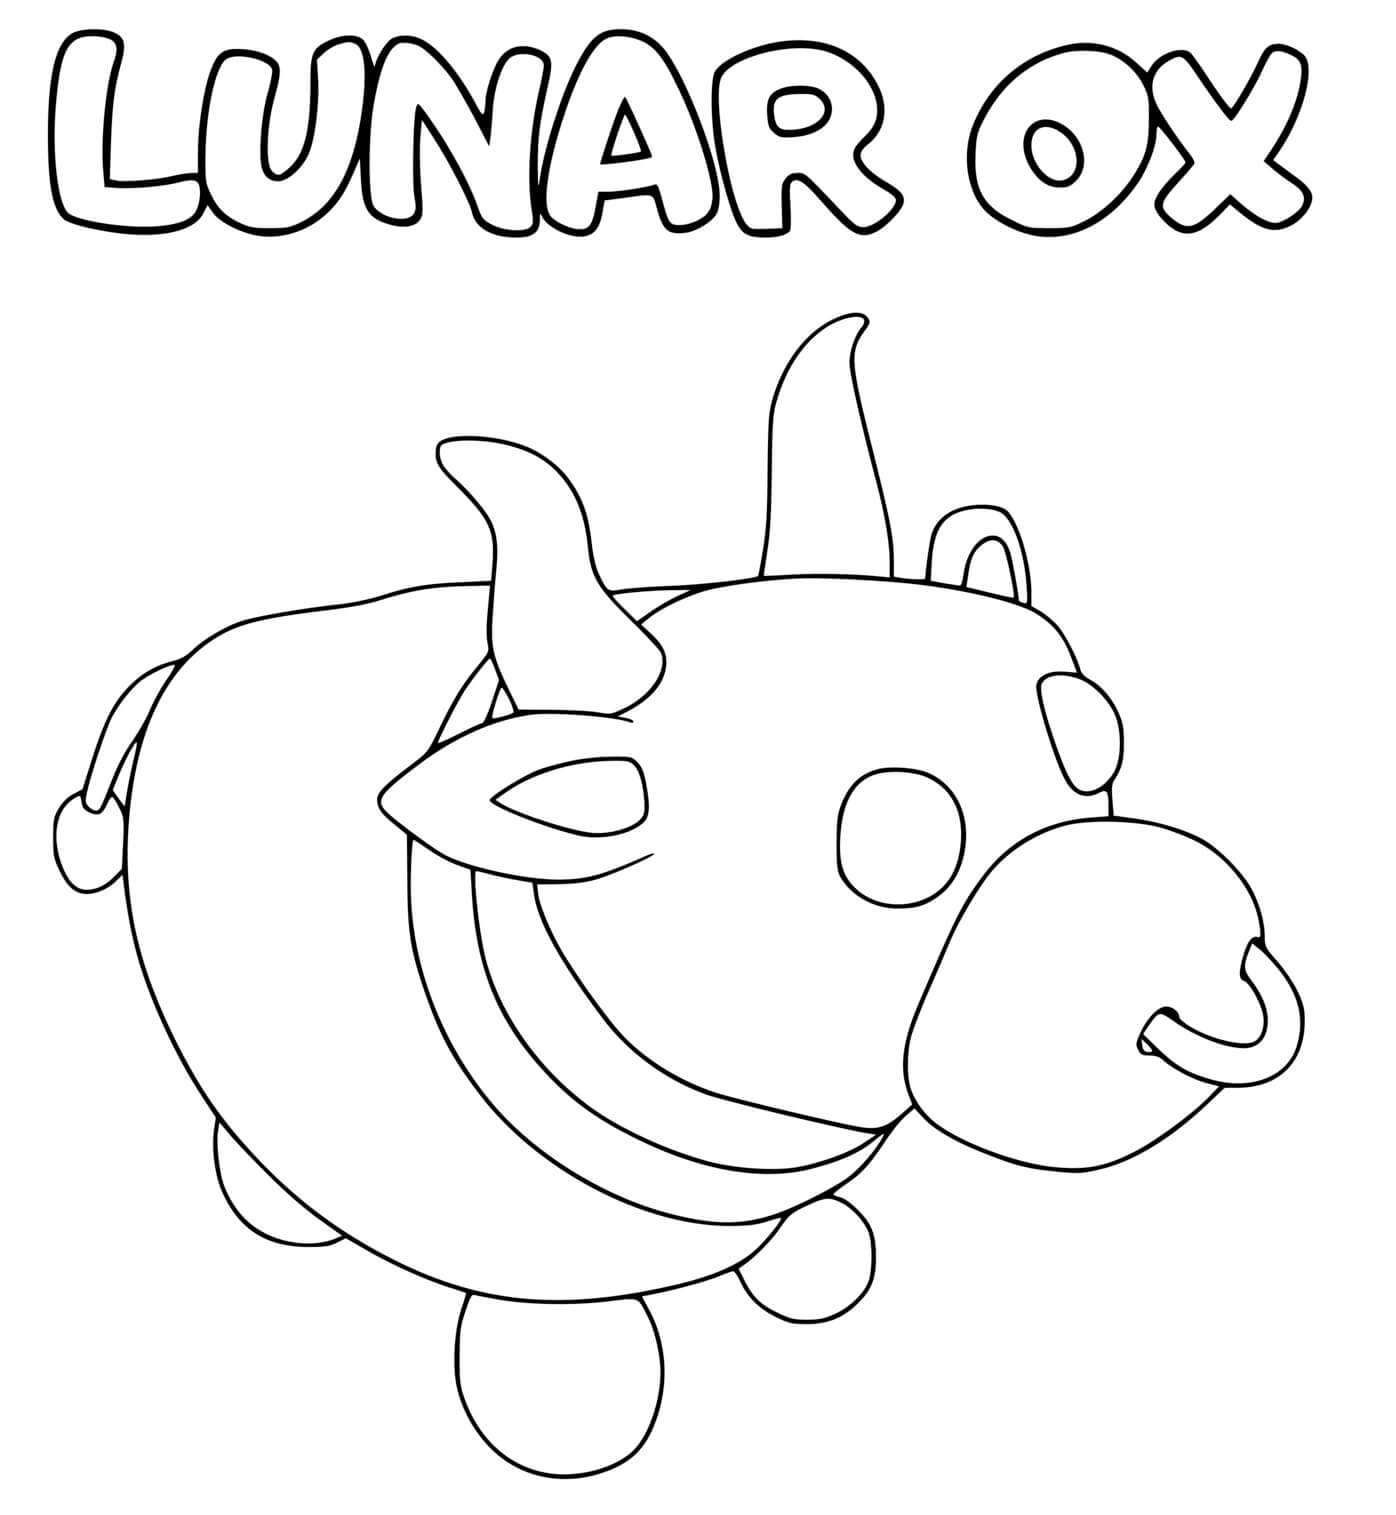 Adopt Me Lunar Ox Coloring Pages   Coloring Cool